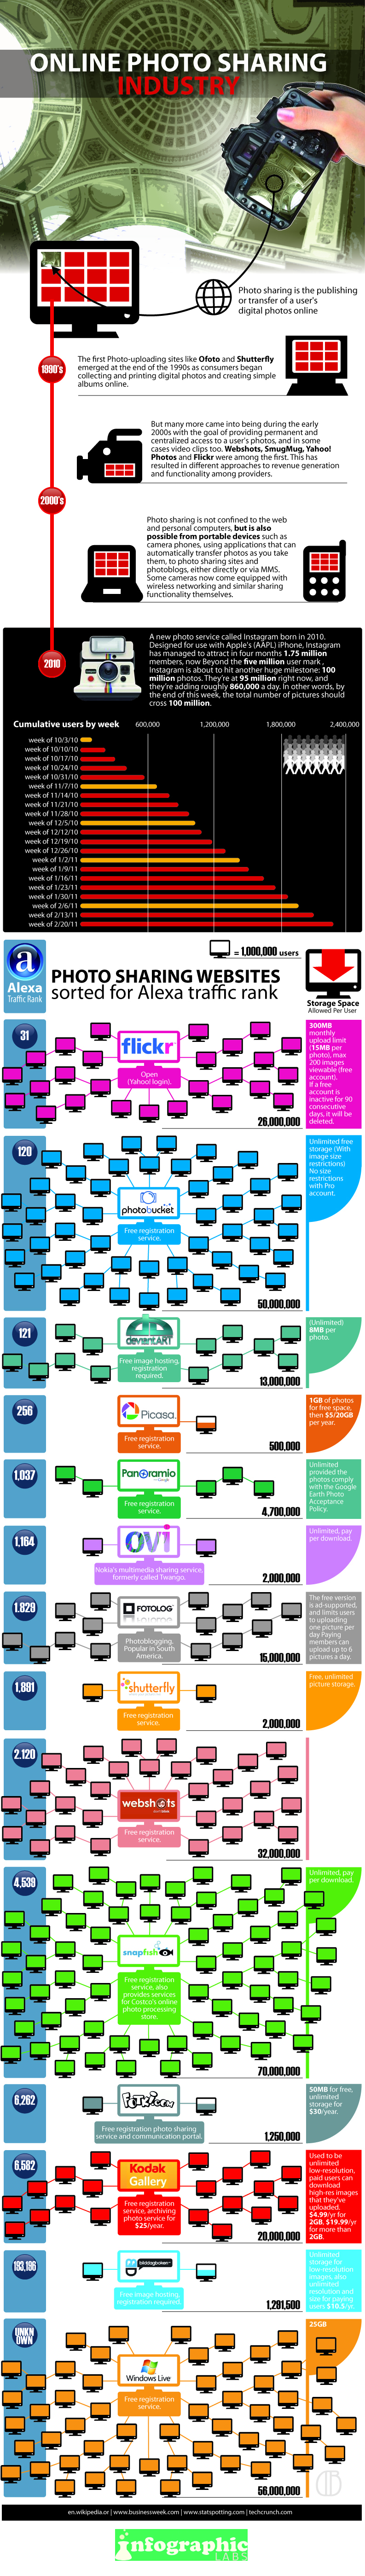 Online Photo Sharing Services Infographic